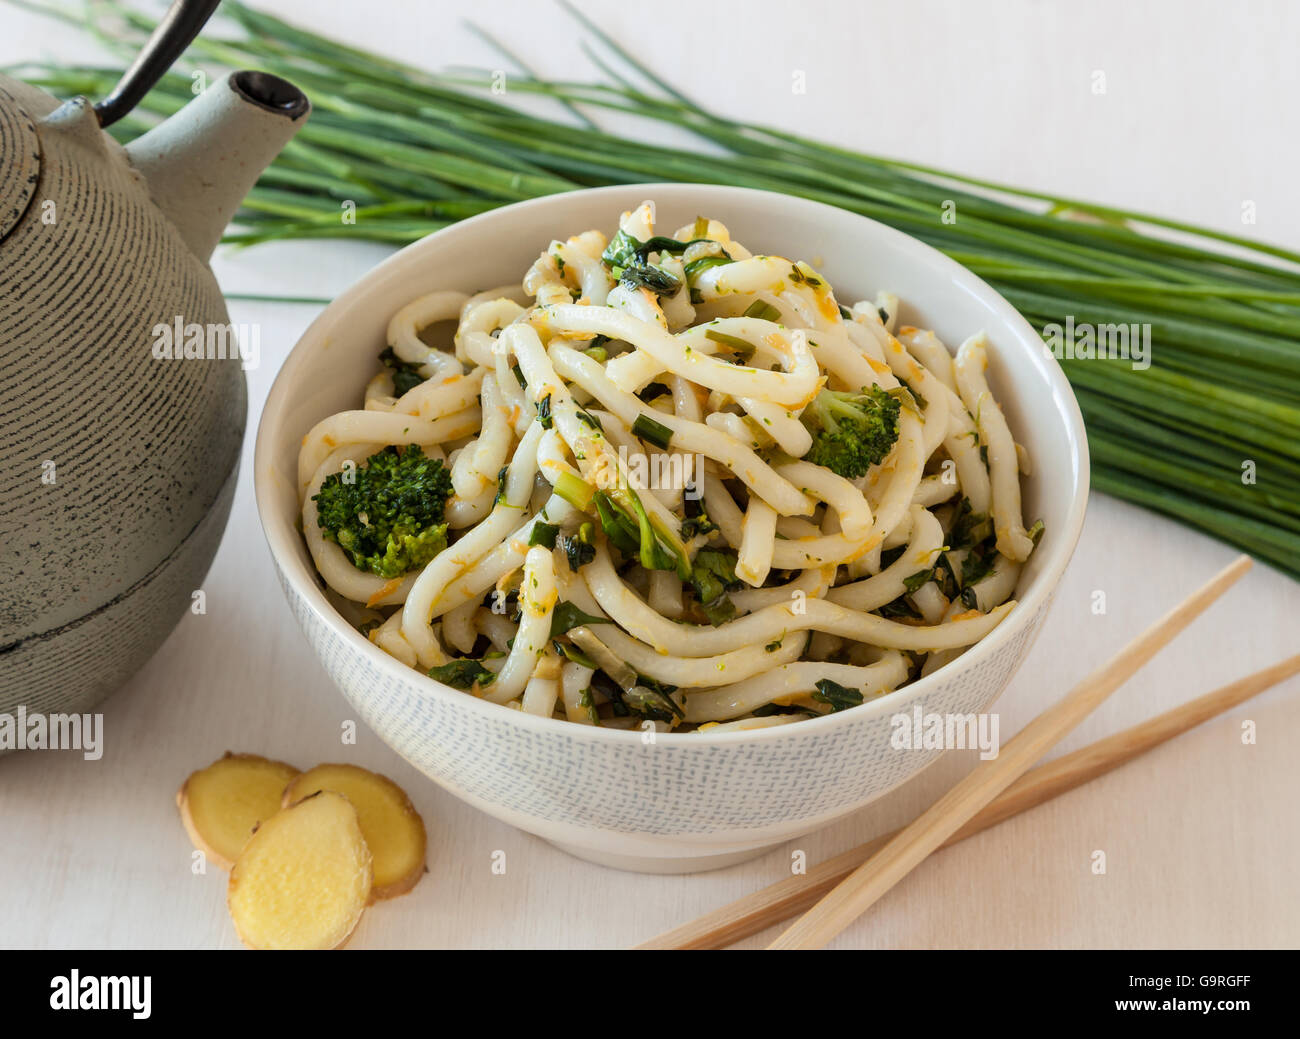 Japanese food. Udon noodles with broccoli and vegetables Stock Photo